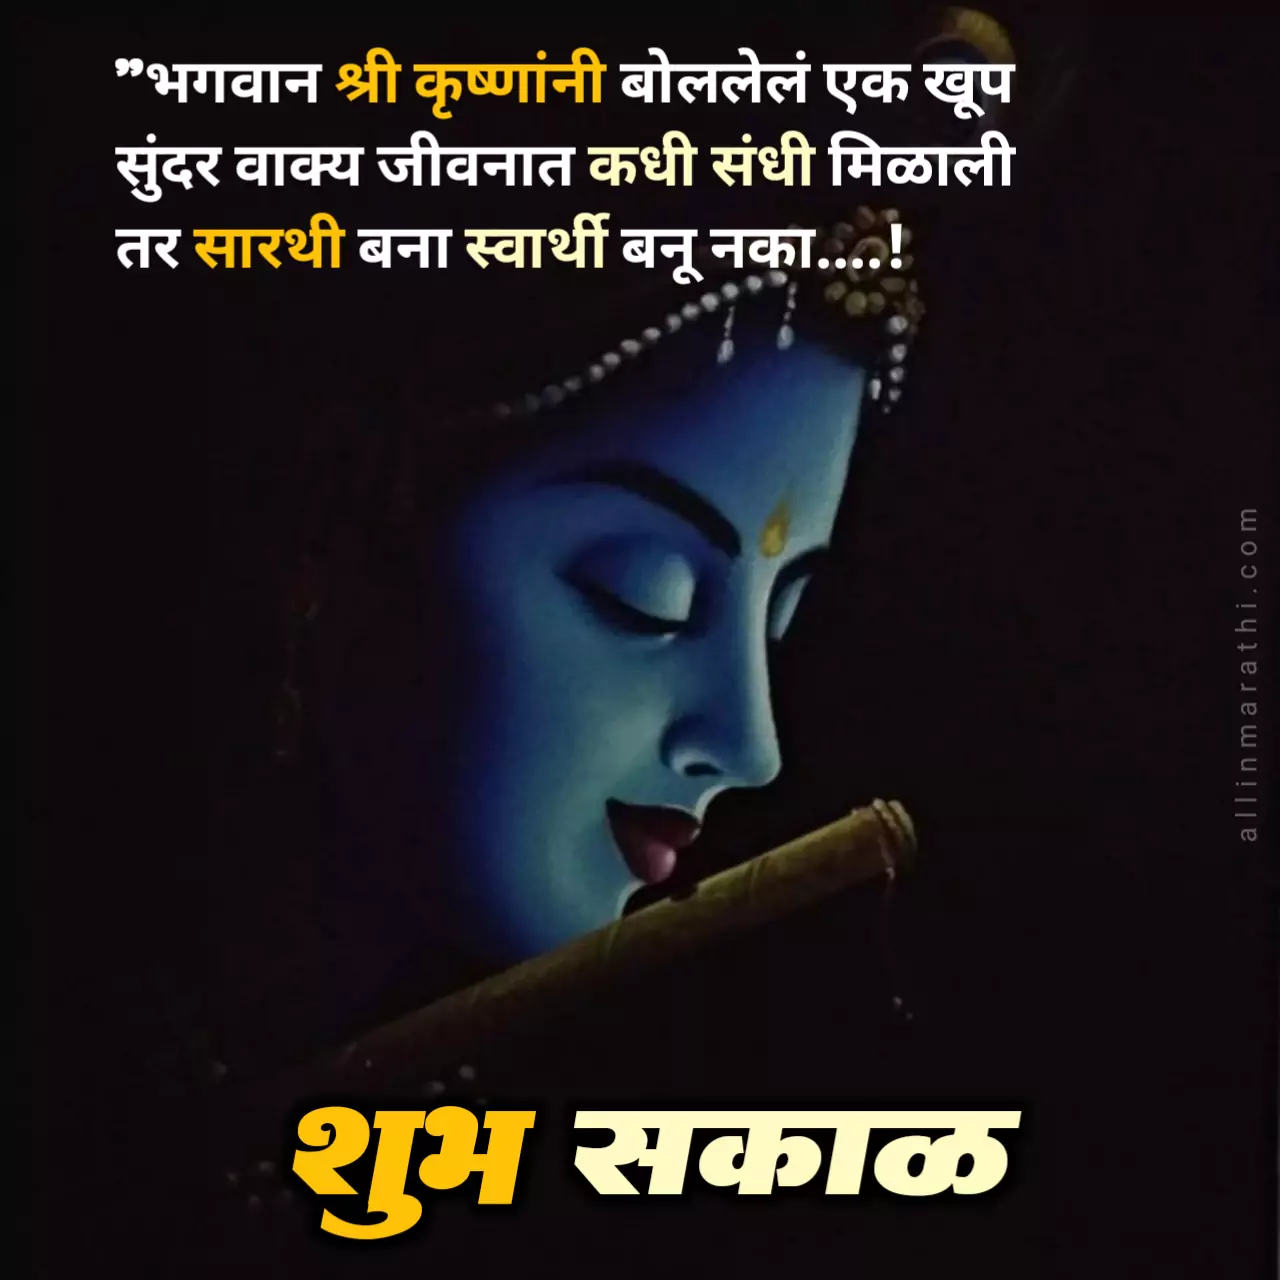 good morning quotes in marathi images 